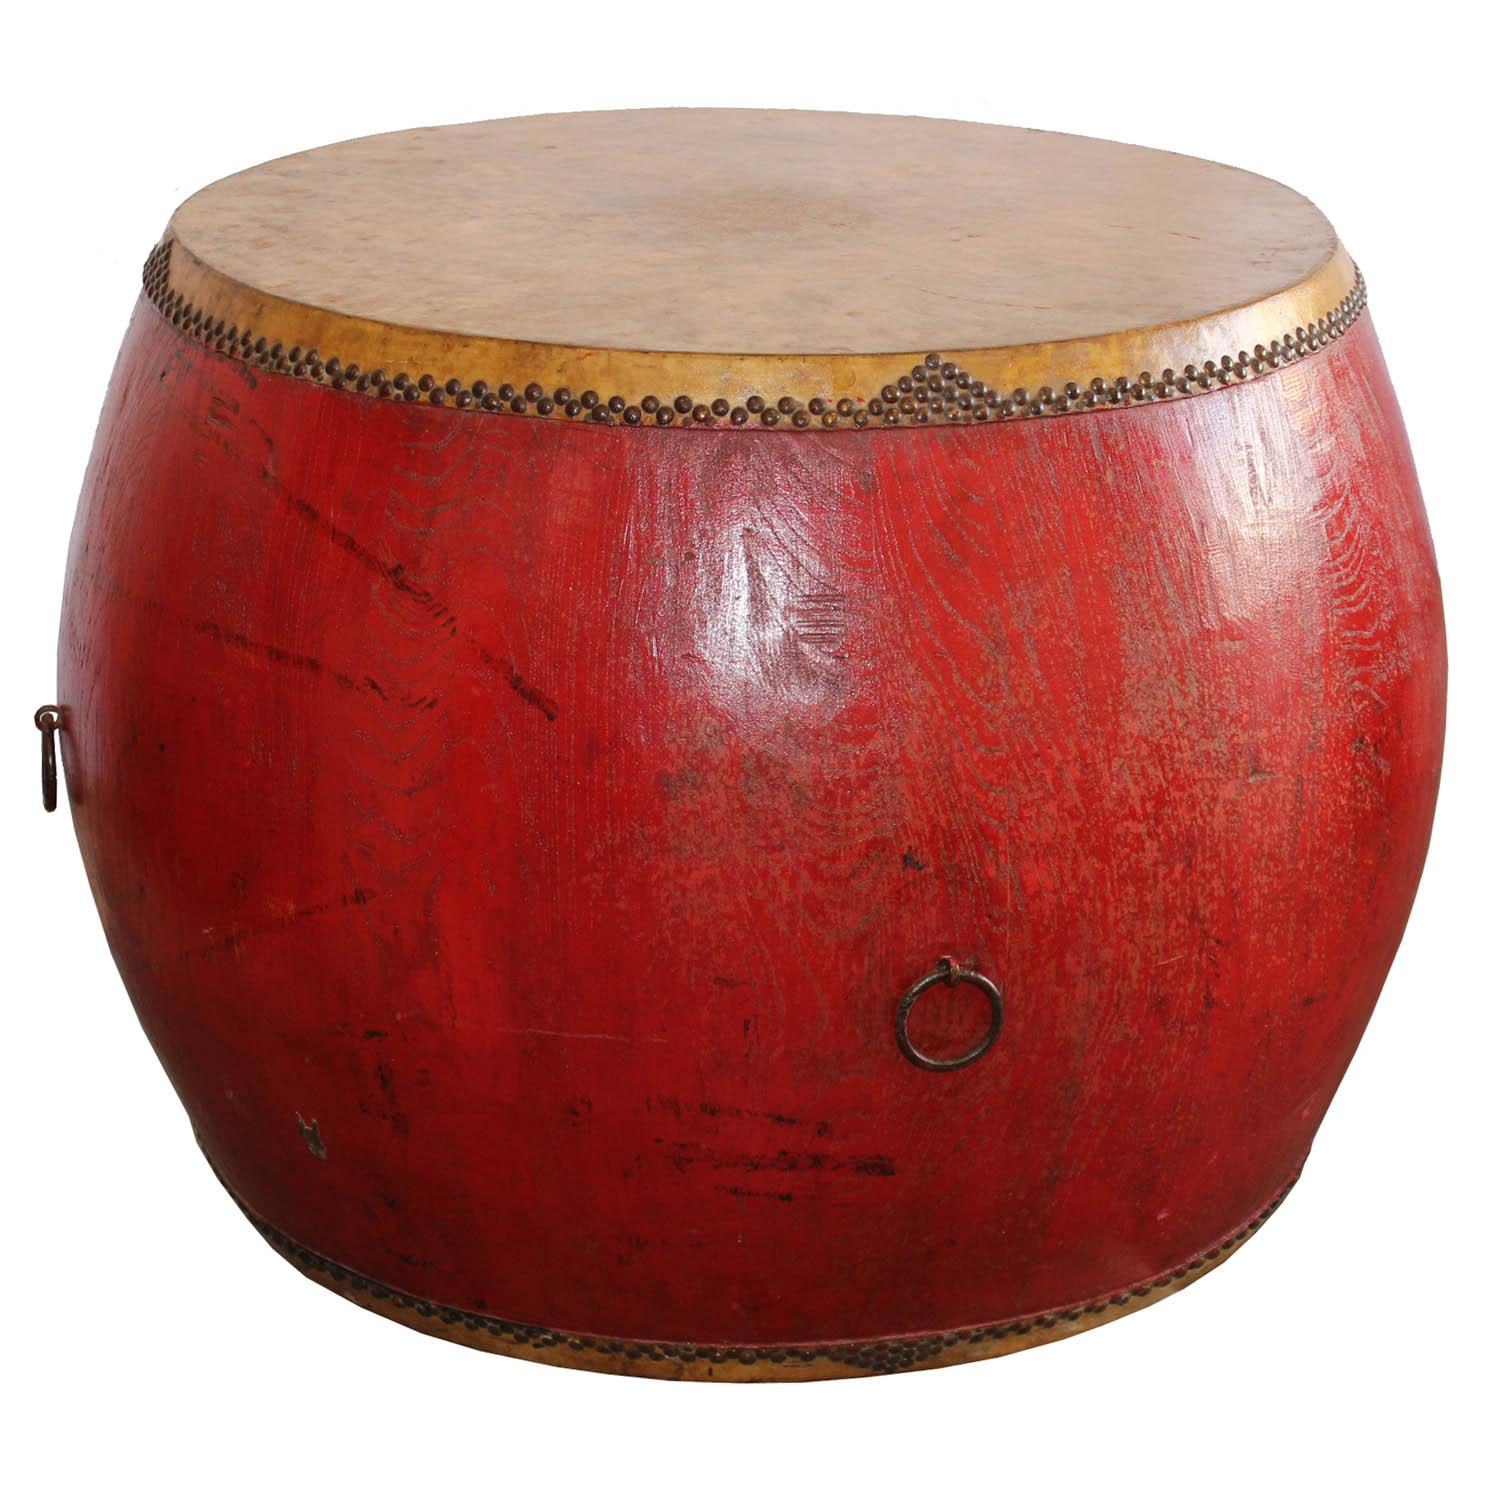 Original vintage drum was used in ceremonies to celebrate various community events. Red lacquer drum with elmwood base and leather covers makes an interesting table.